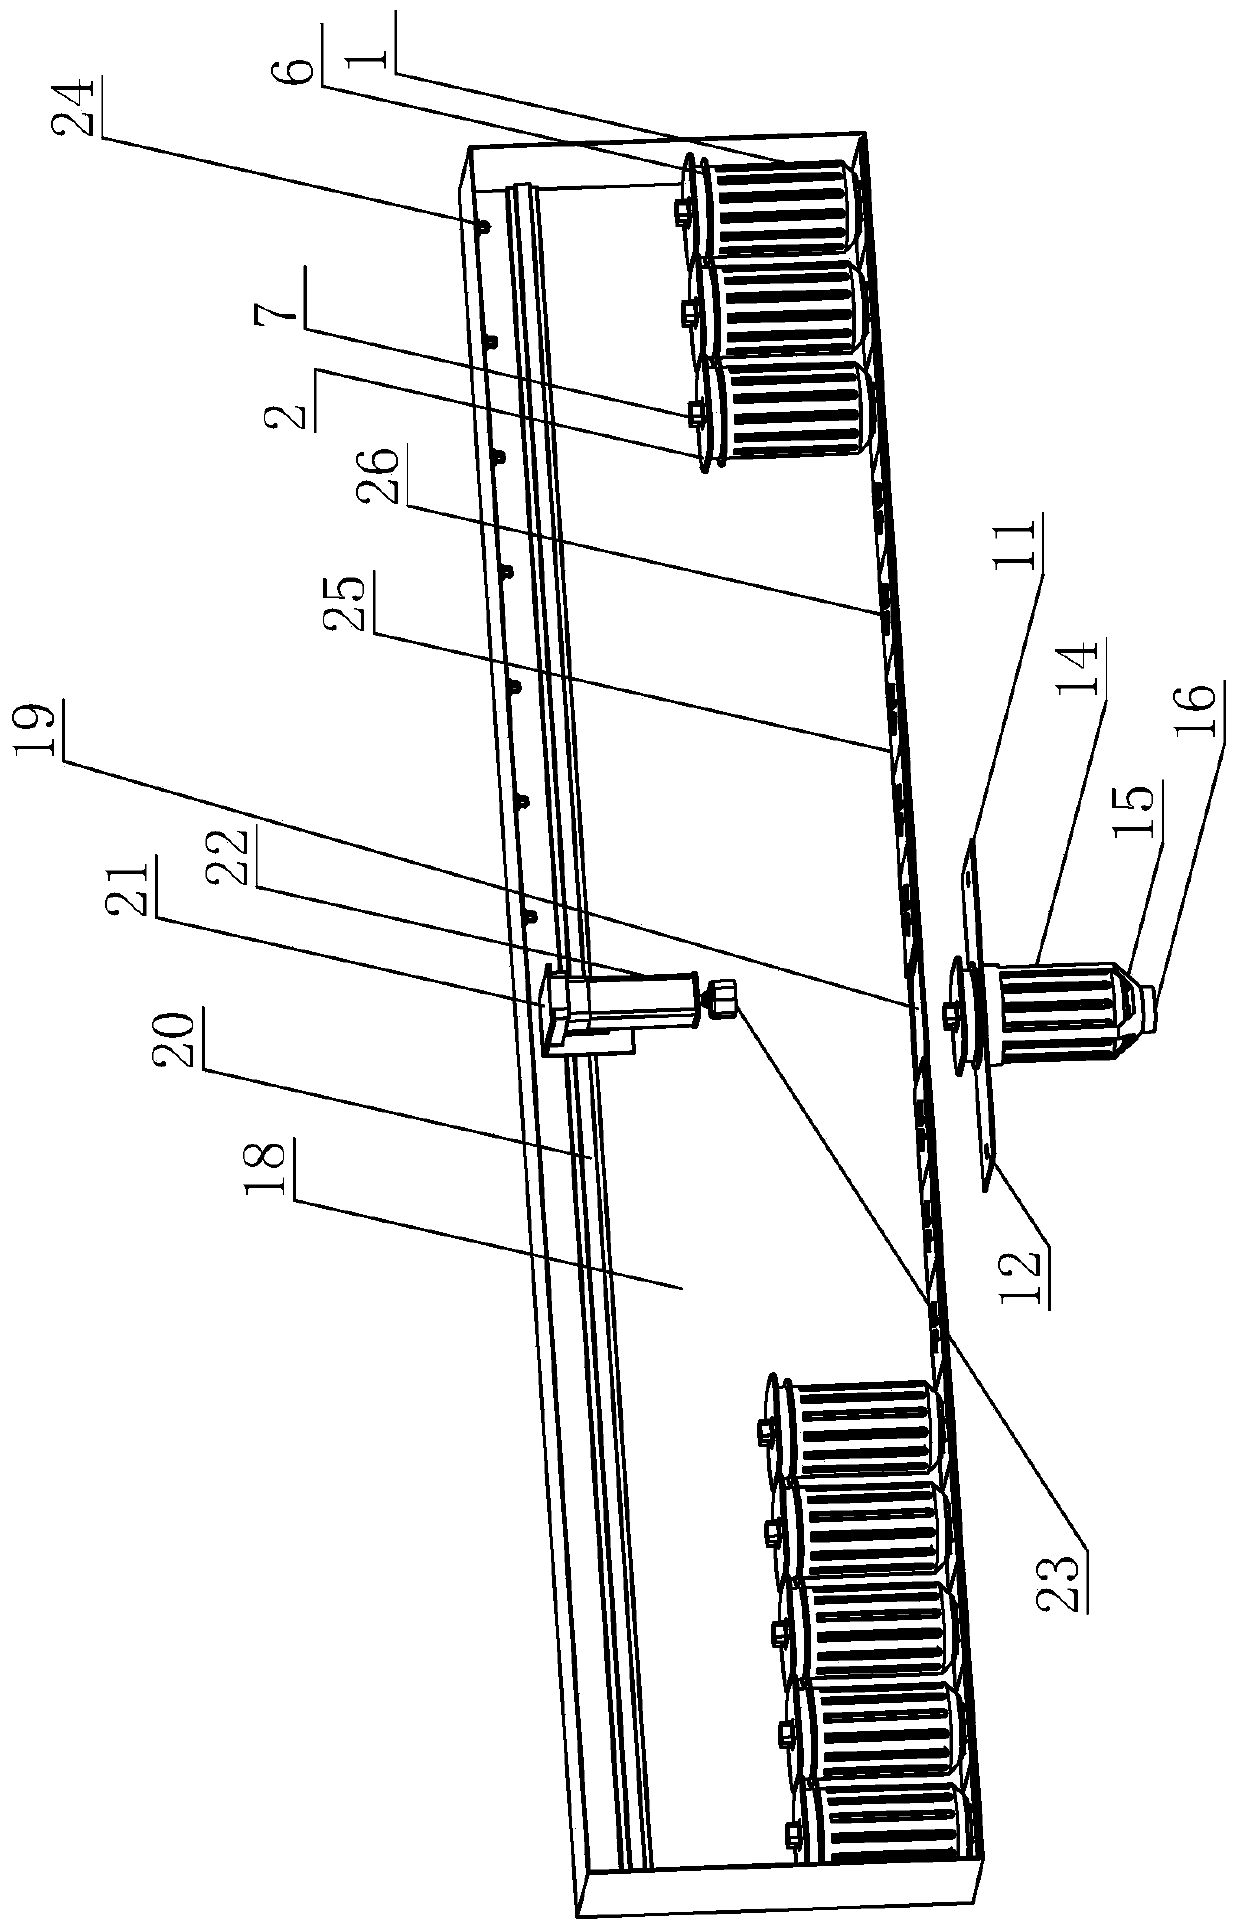 Continuous dosing type white ant monitoring device